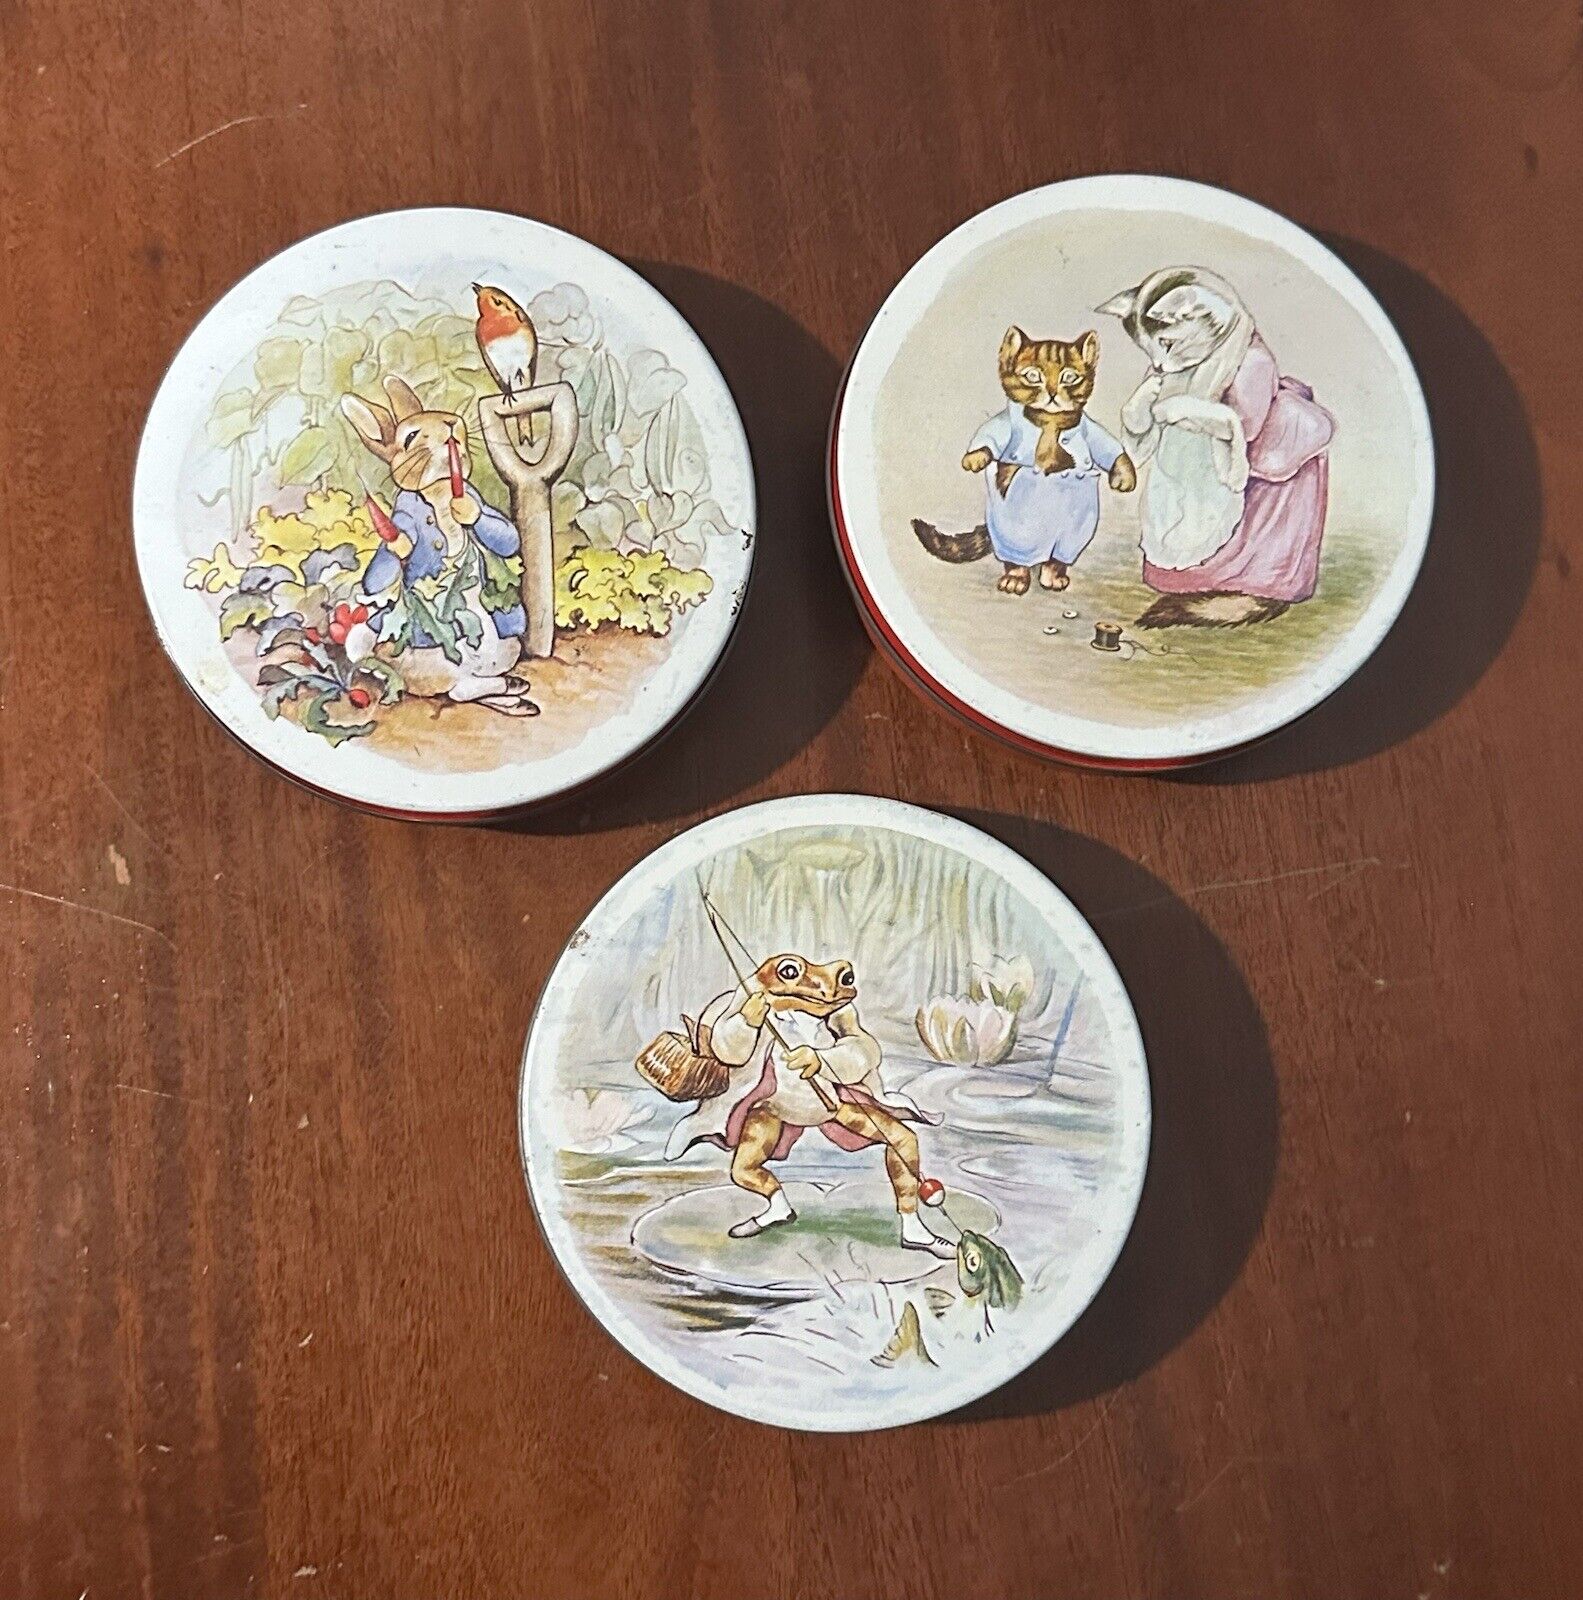 Lot of 3 Huntley Palmers Biscuit Tins Tom Kitten Jeremy Fisher Peter Rabbit